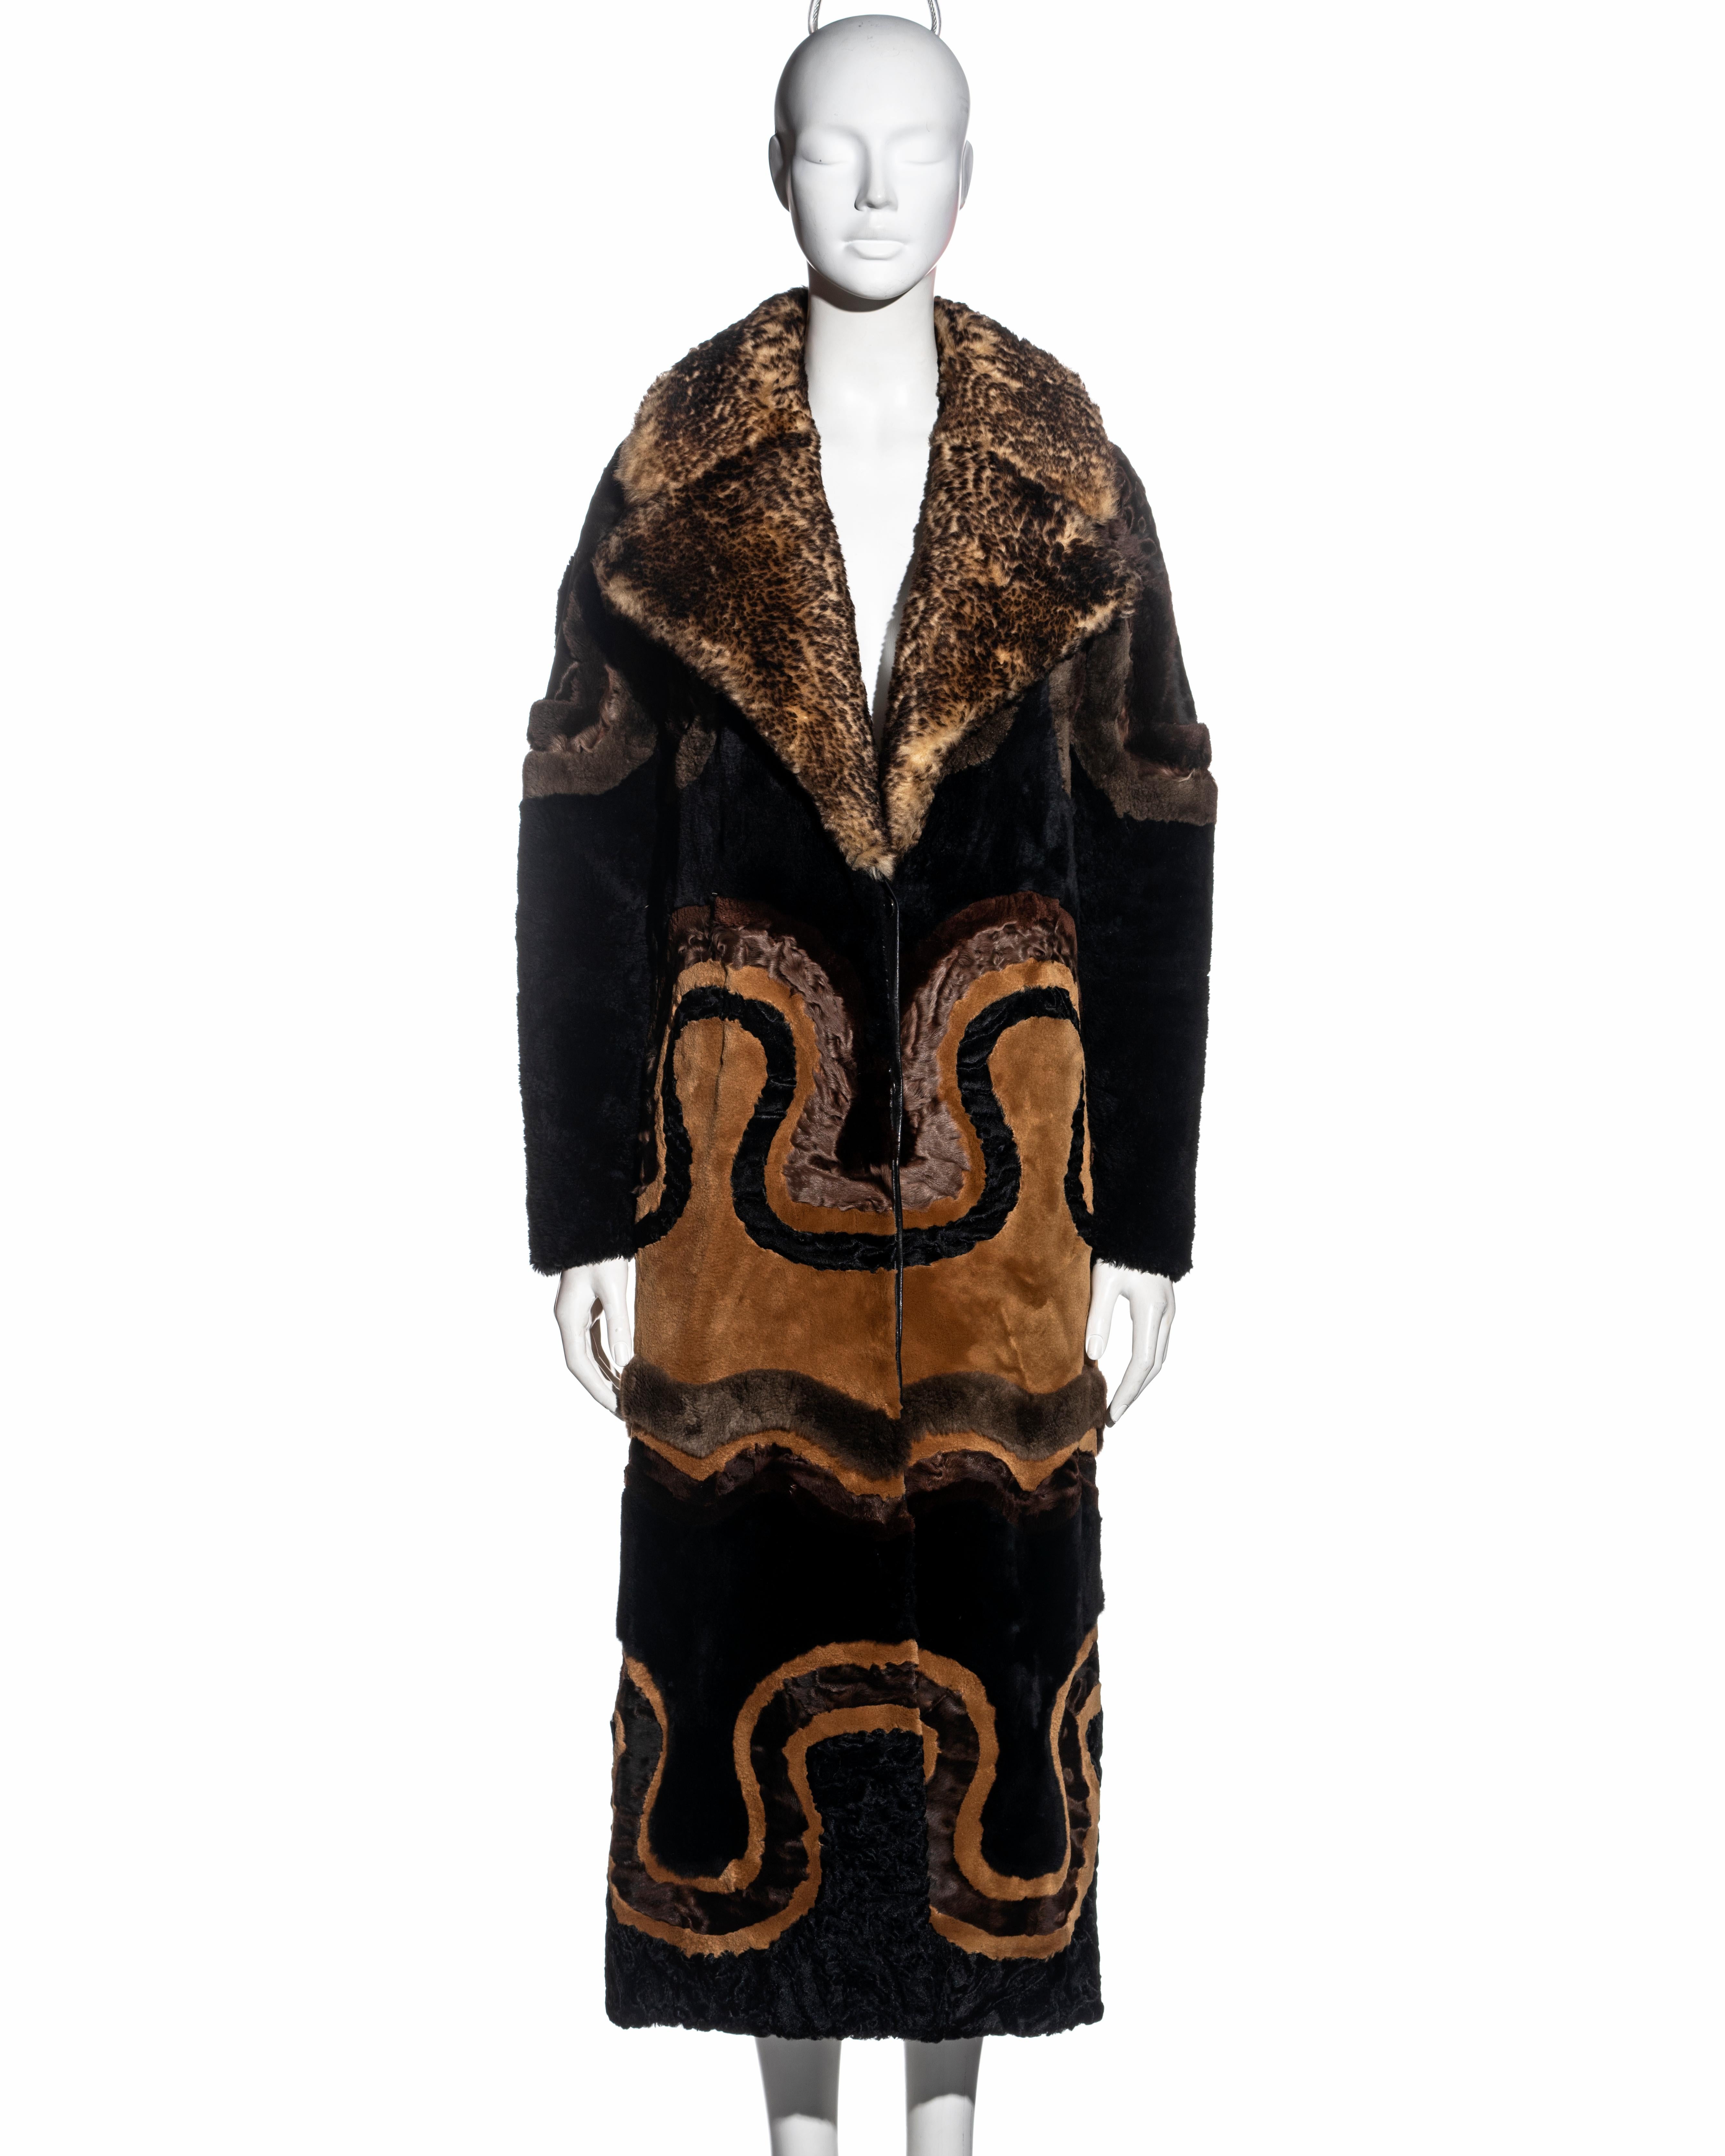 ▪ Tom Ford multi-fur long coat 
▪ North American Beaver, Mink, Coypu, Persian Lamb
▪ 1970s inspired pattern made up of many impressive sinuous seams that curve and undulate
▪ Horn buttons at front opening with black leather placket 
▪ Large Persian